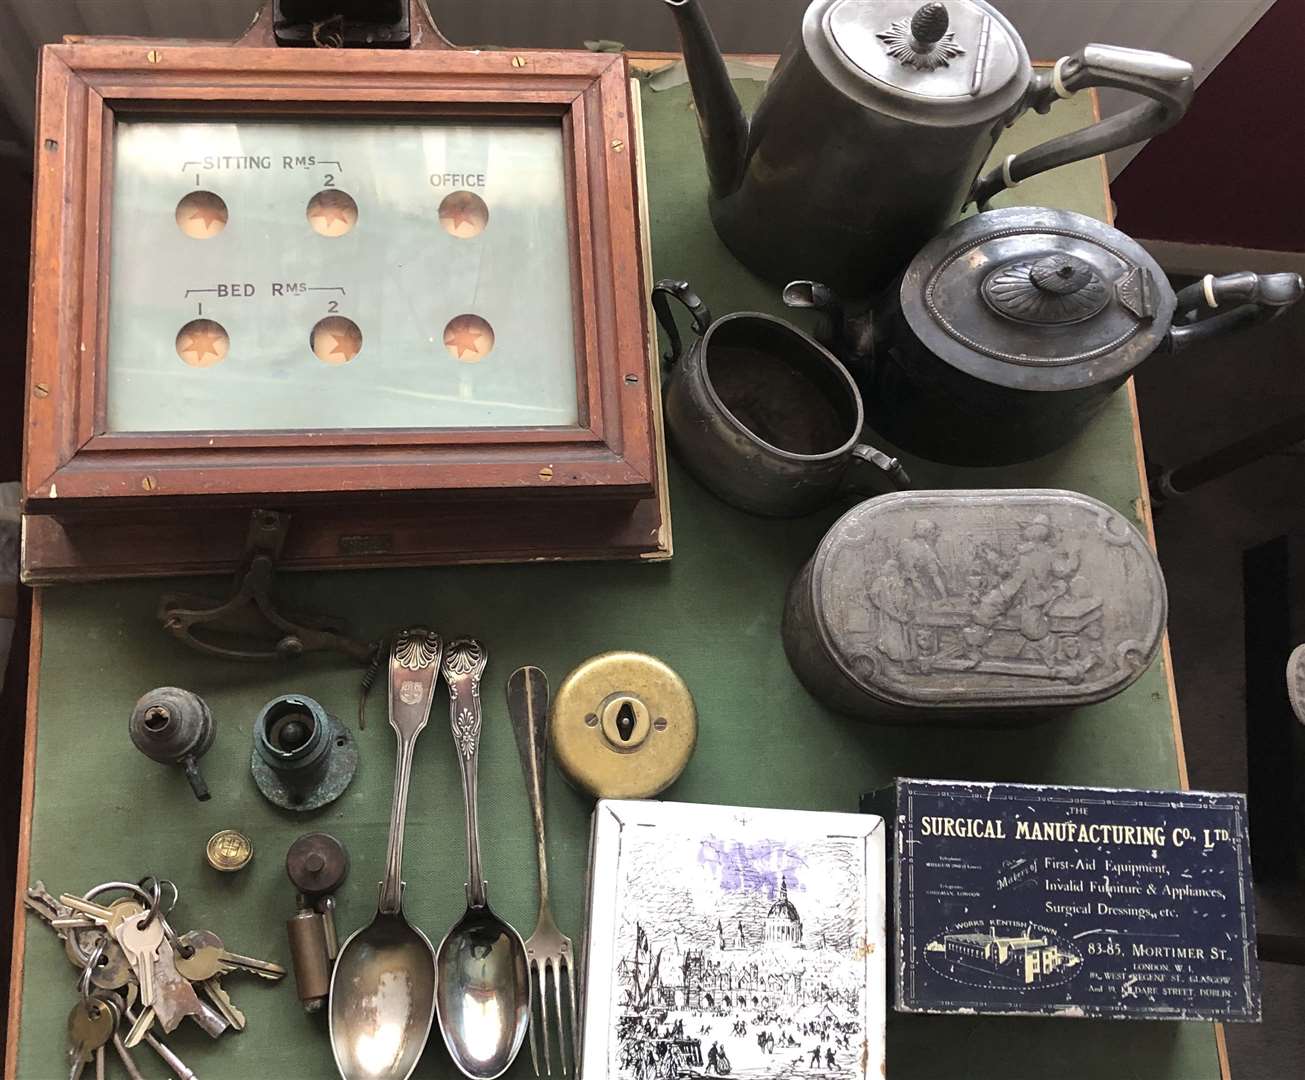 Some physical items from the old hospital